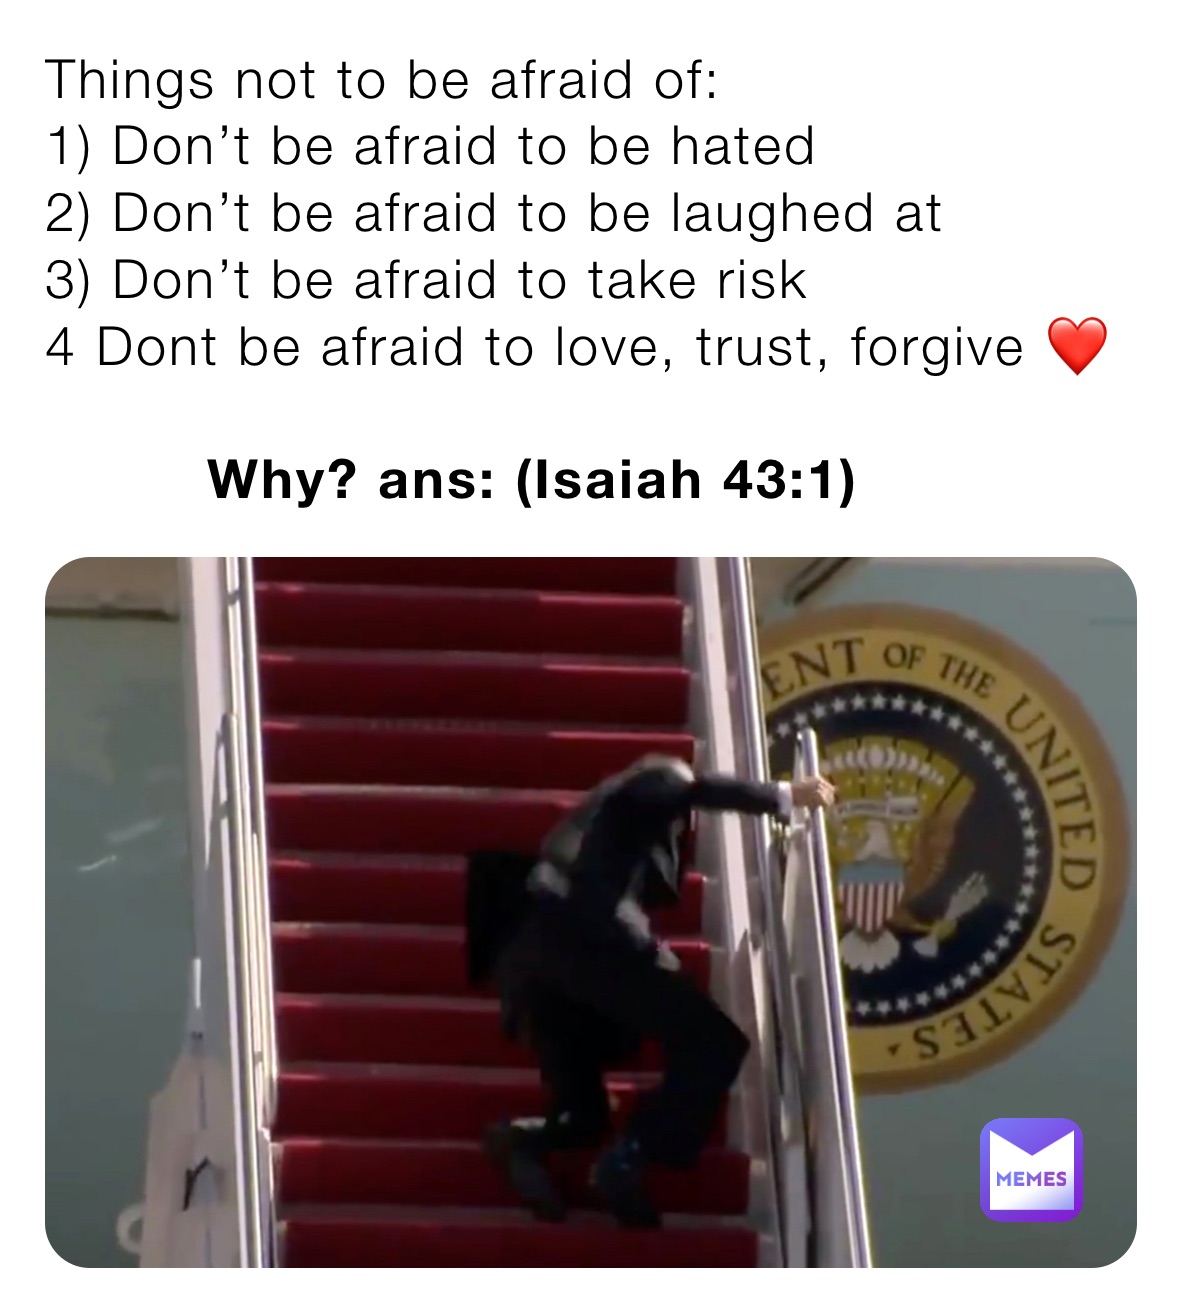 Things not to be afraid of:
1) Don’t be afraid to be hated 
2) Don’t be afraid to be laughed at
3) Don’t be afraid to take risk
4 Dont be afraid to love, trust, forgive ❤️ 

         Why? ans: (Isaiah 43:1)